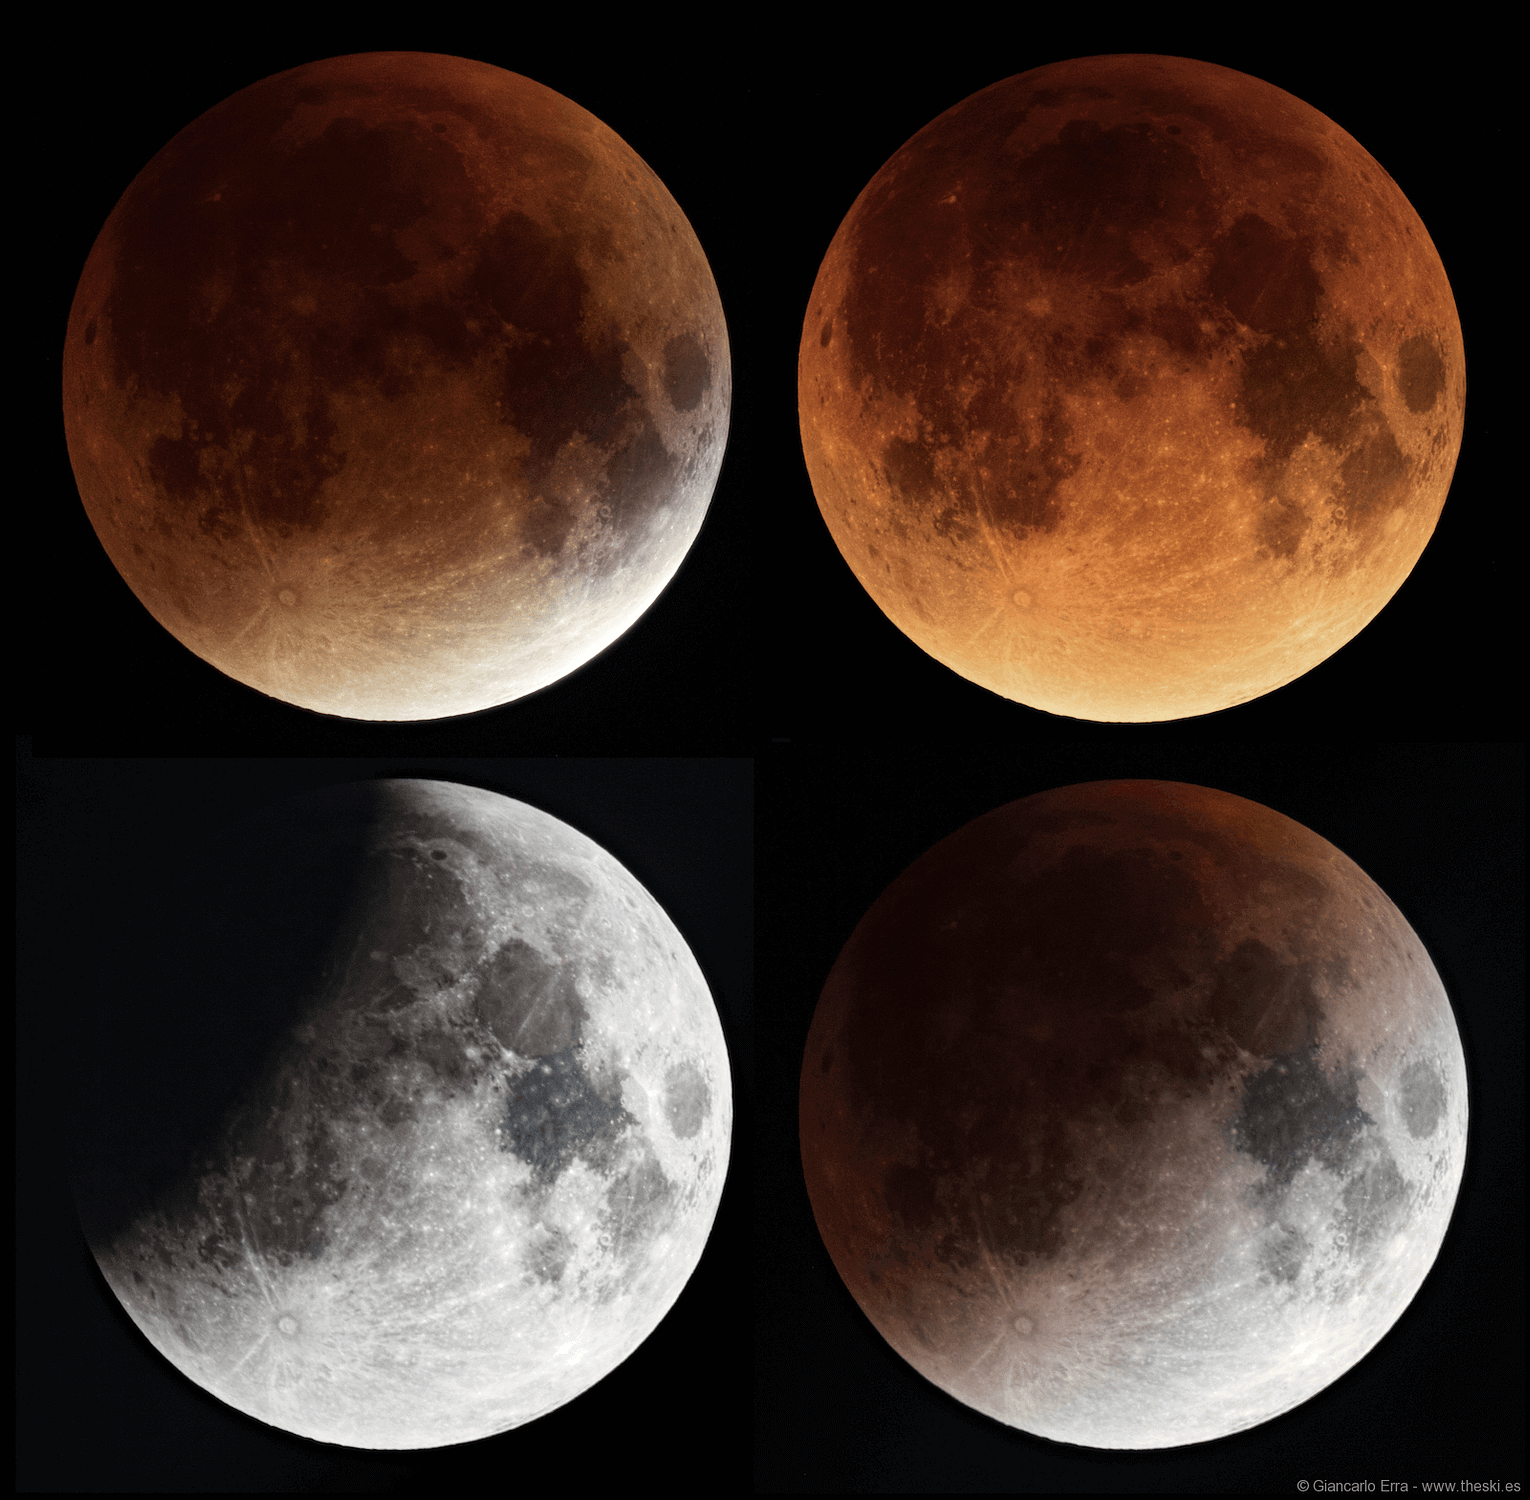 The Skies Astrophotography by Giancarlo Erra MOSAIC ECLIPSE 2015 site